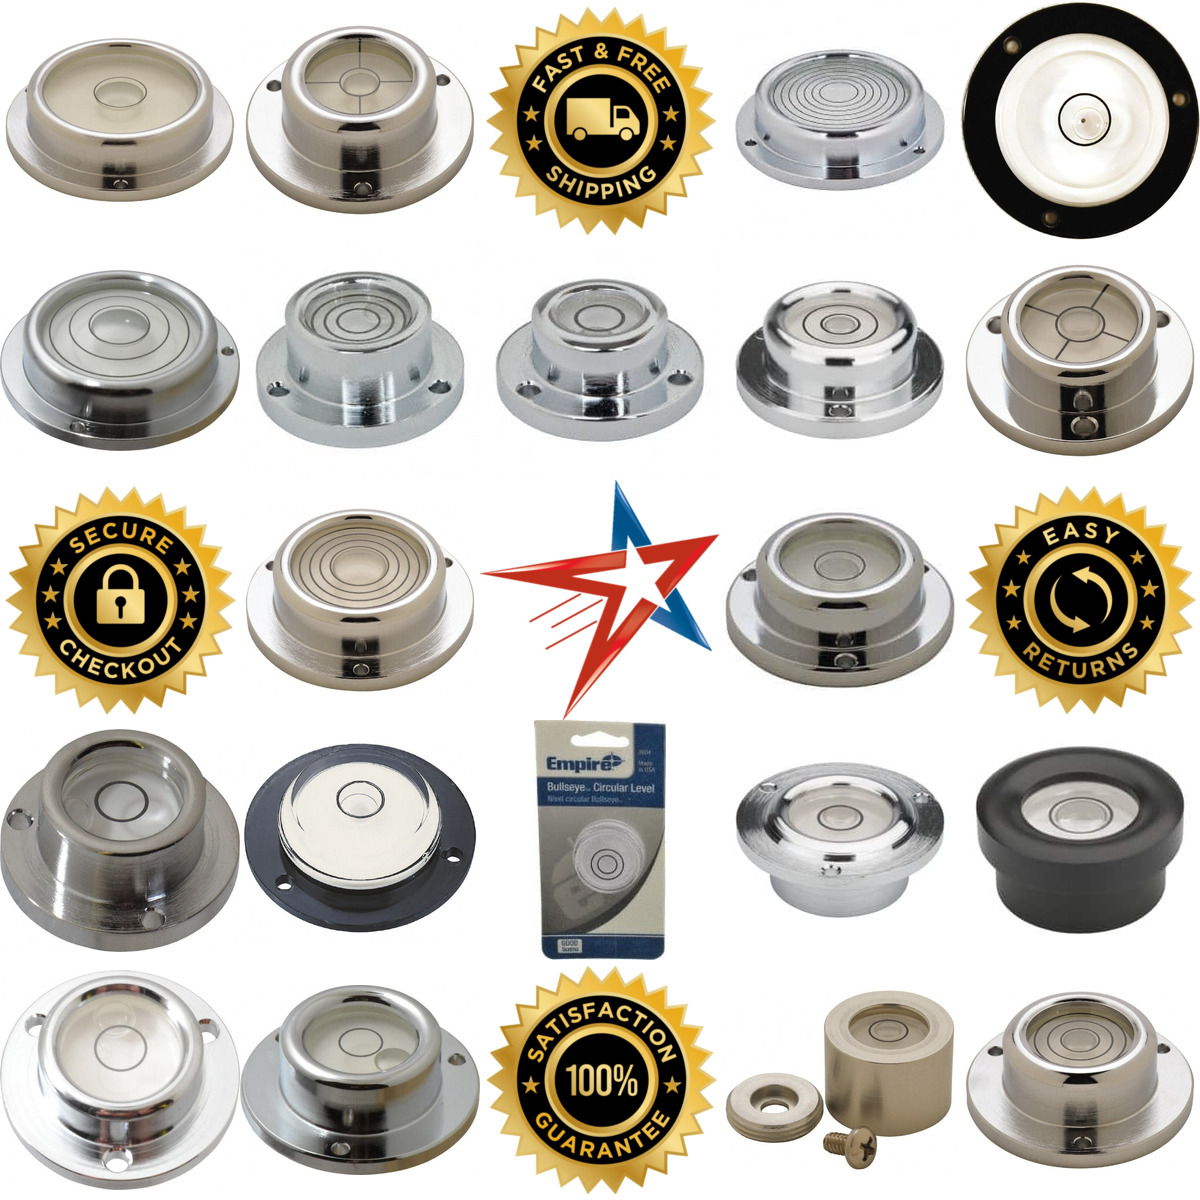 A selection of Bulls Eye Circular Levels products on GoVets